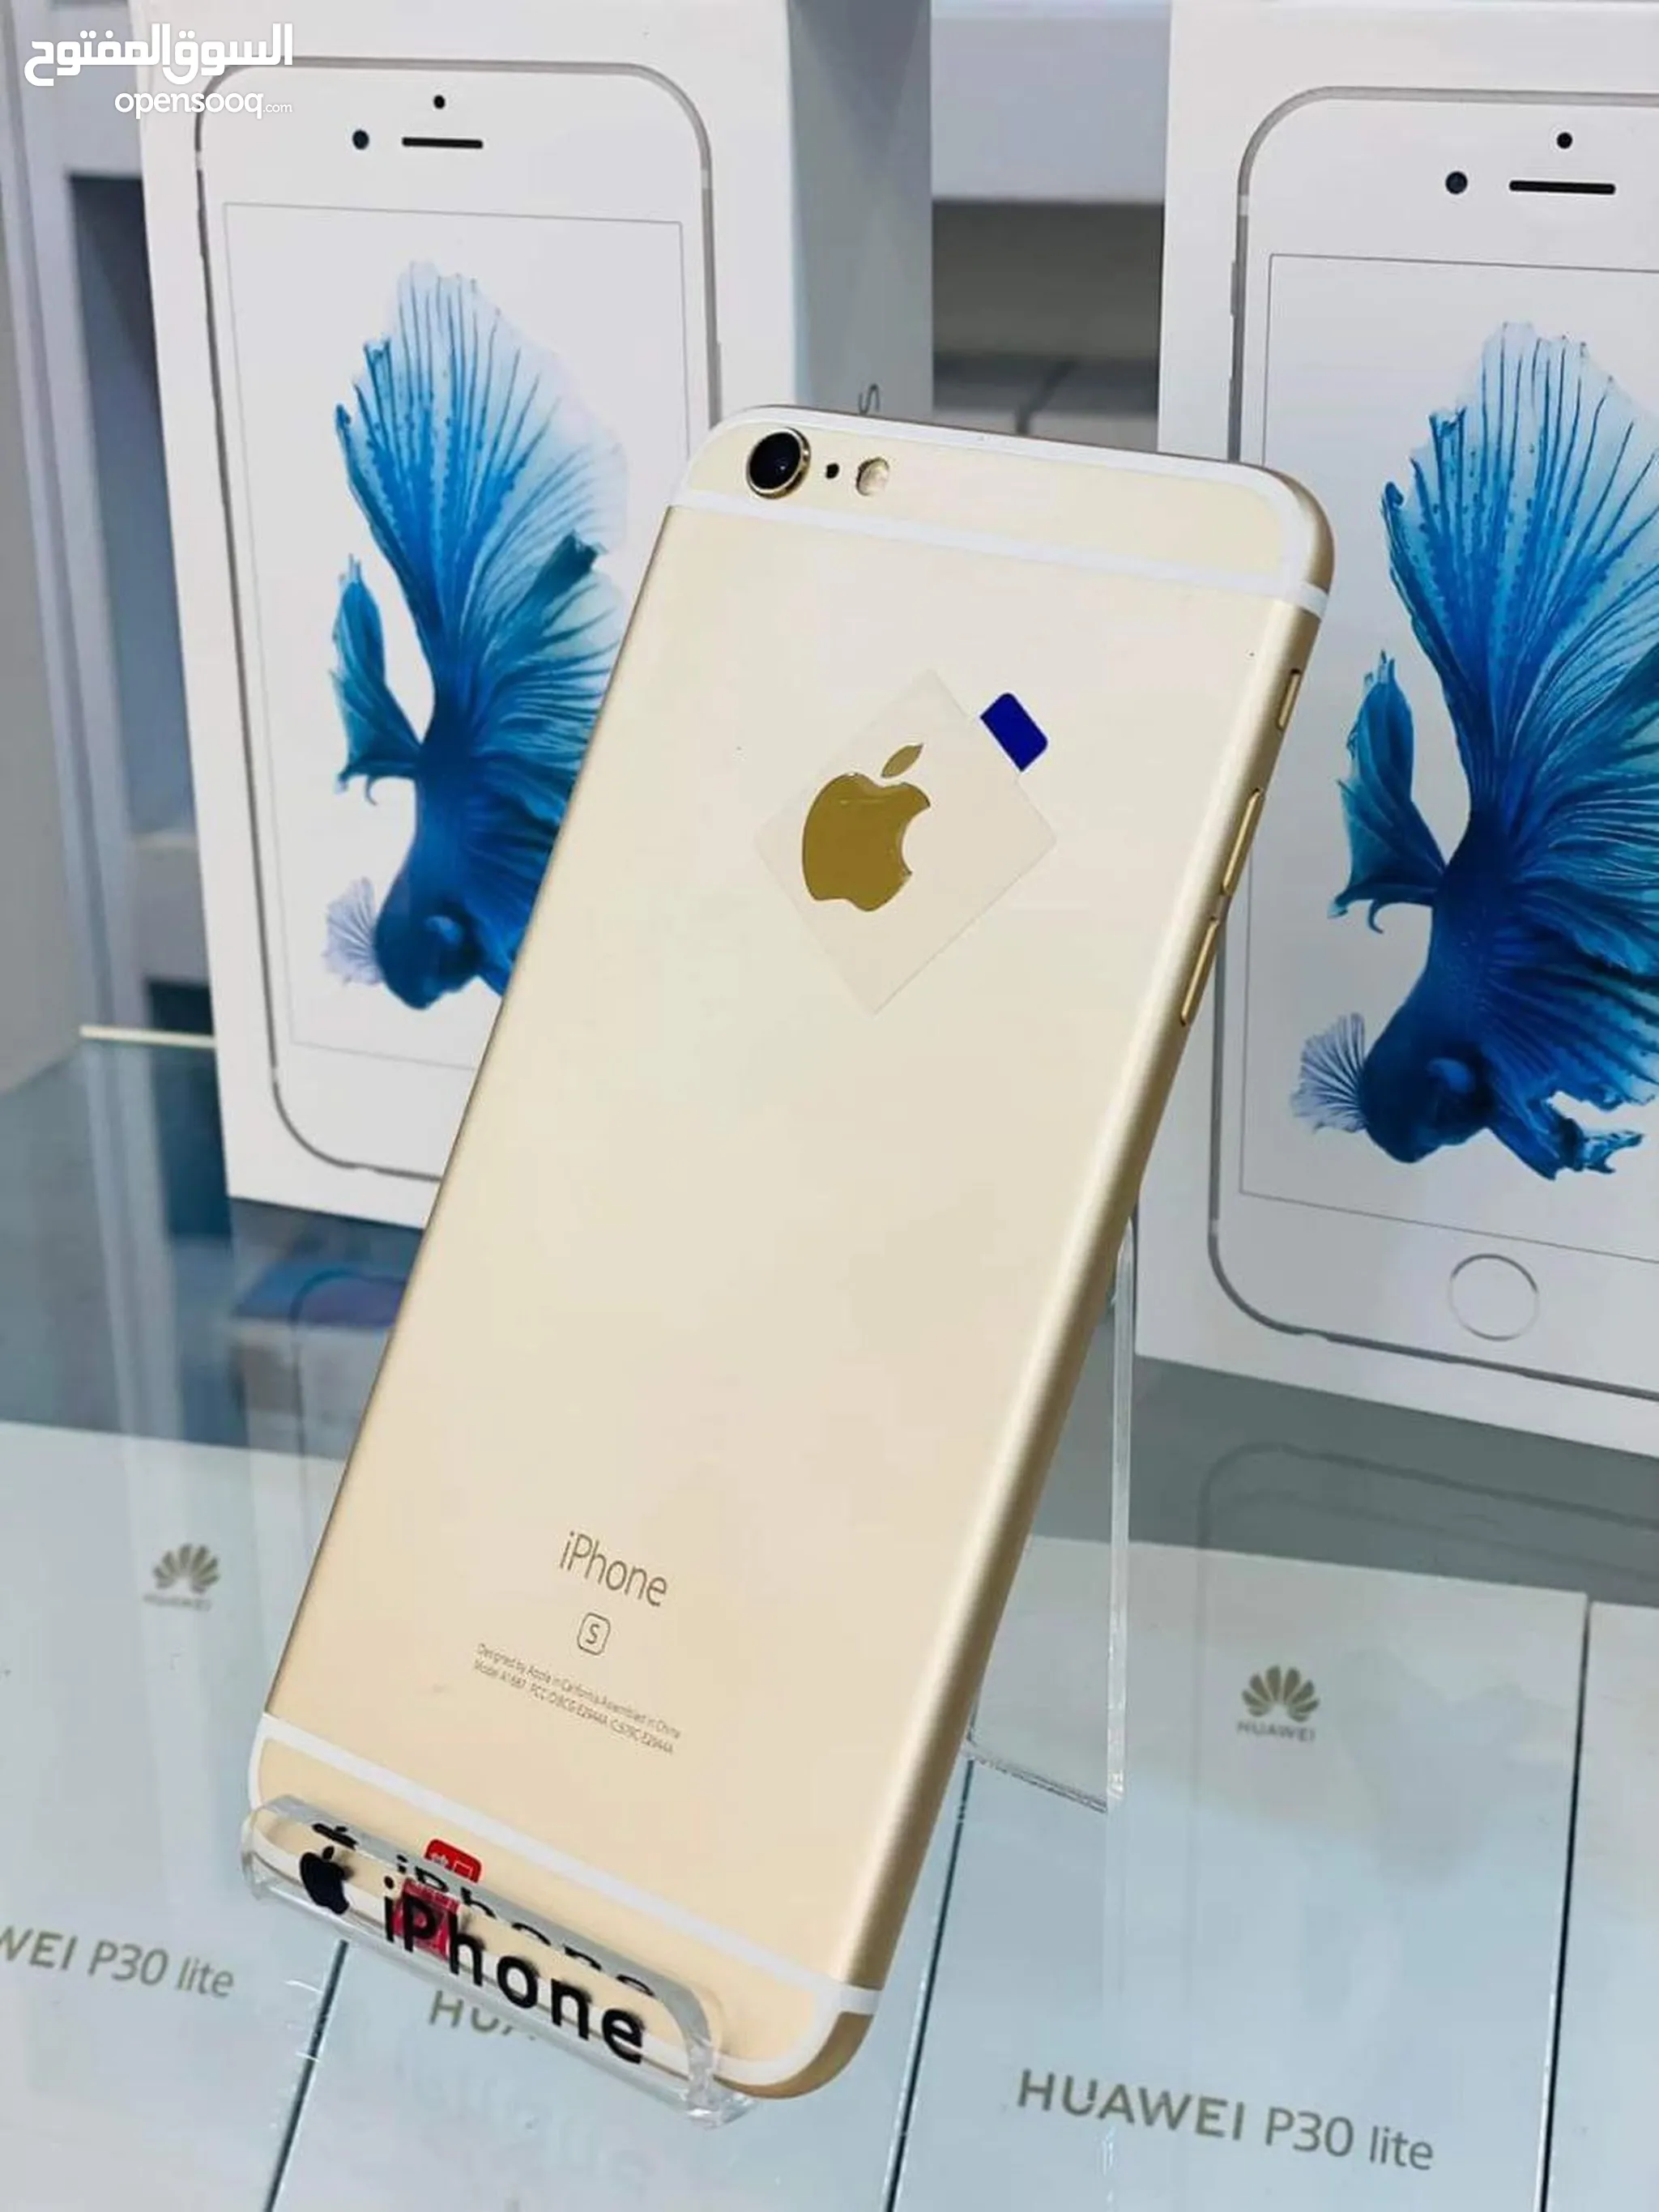 Apple iPhone 6 Plus for Sale in Iraq, Cheapest Apple iPhone 6 Plus |  OpenSooq